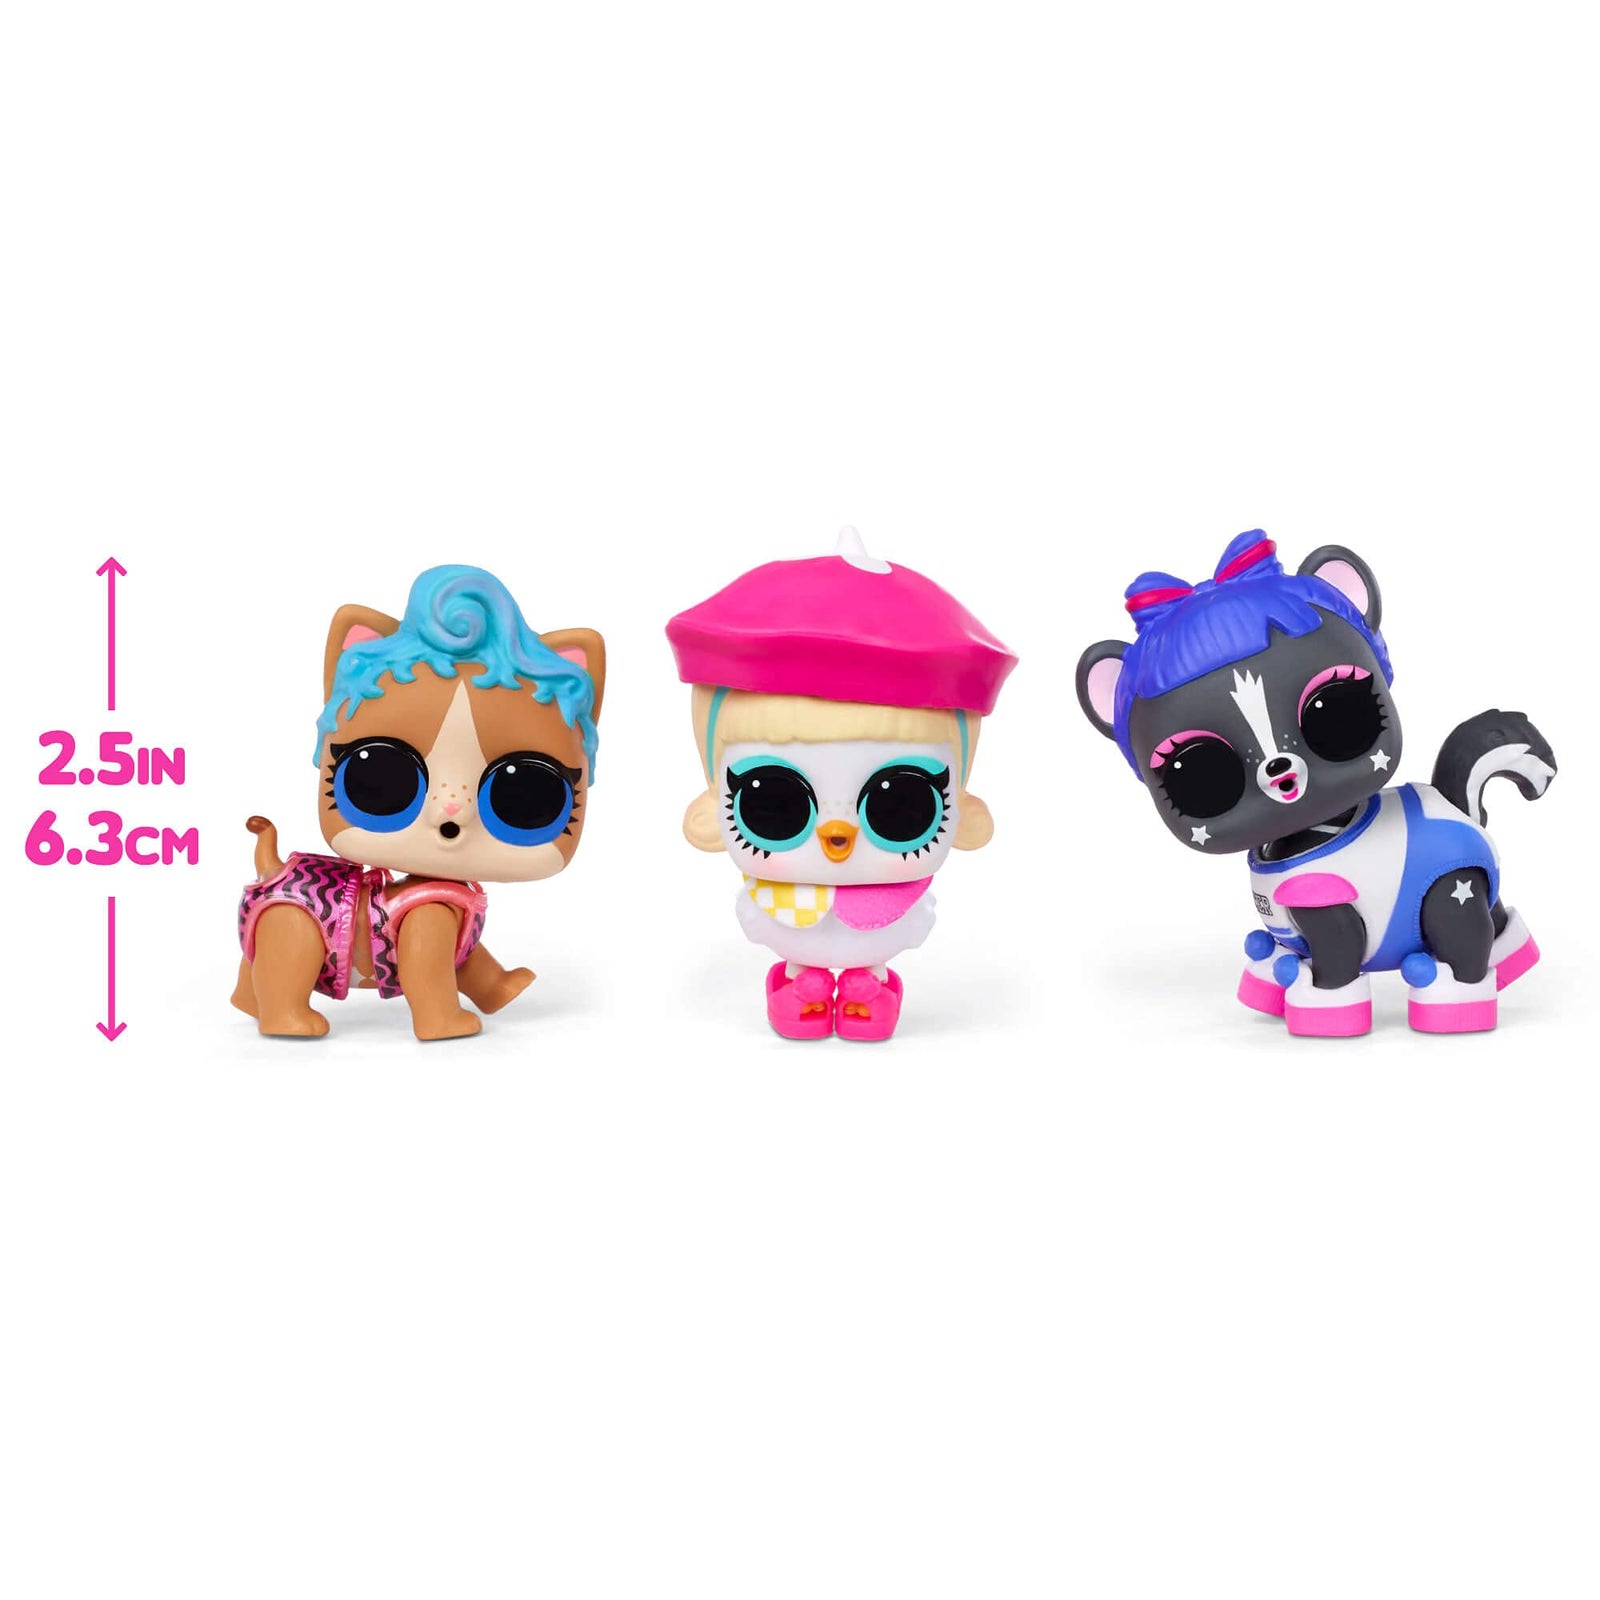 LOL Surprise Color Change Pets 2 Pack Exclusive with 6 Surprises Including Outfit, Accessories, Color Change Ball- Collectible Doll Toy, Gift for Kids, Toys for Girls Boys Ages 4 5 6 7+ Years Old